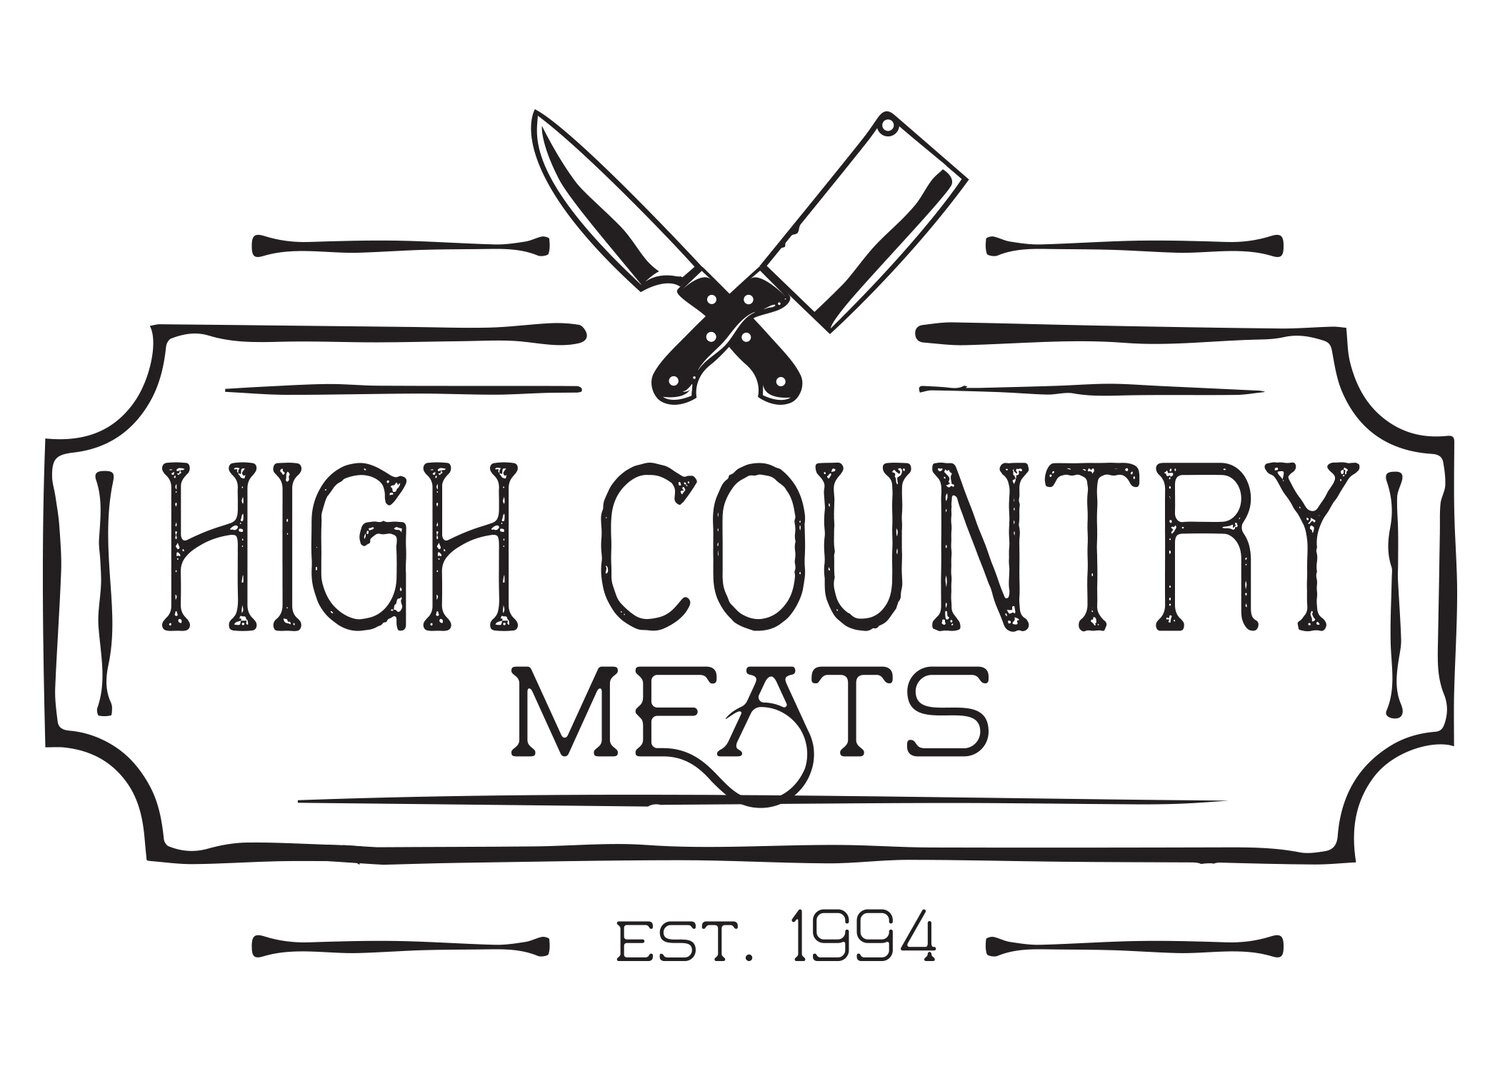 HIGH COUNTRY MEATS